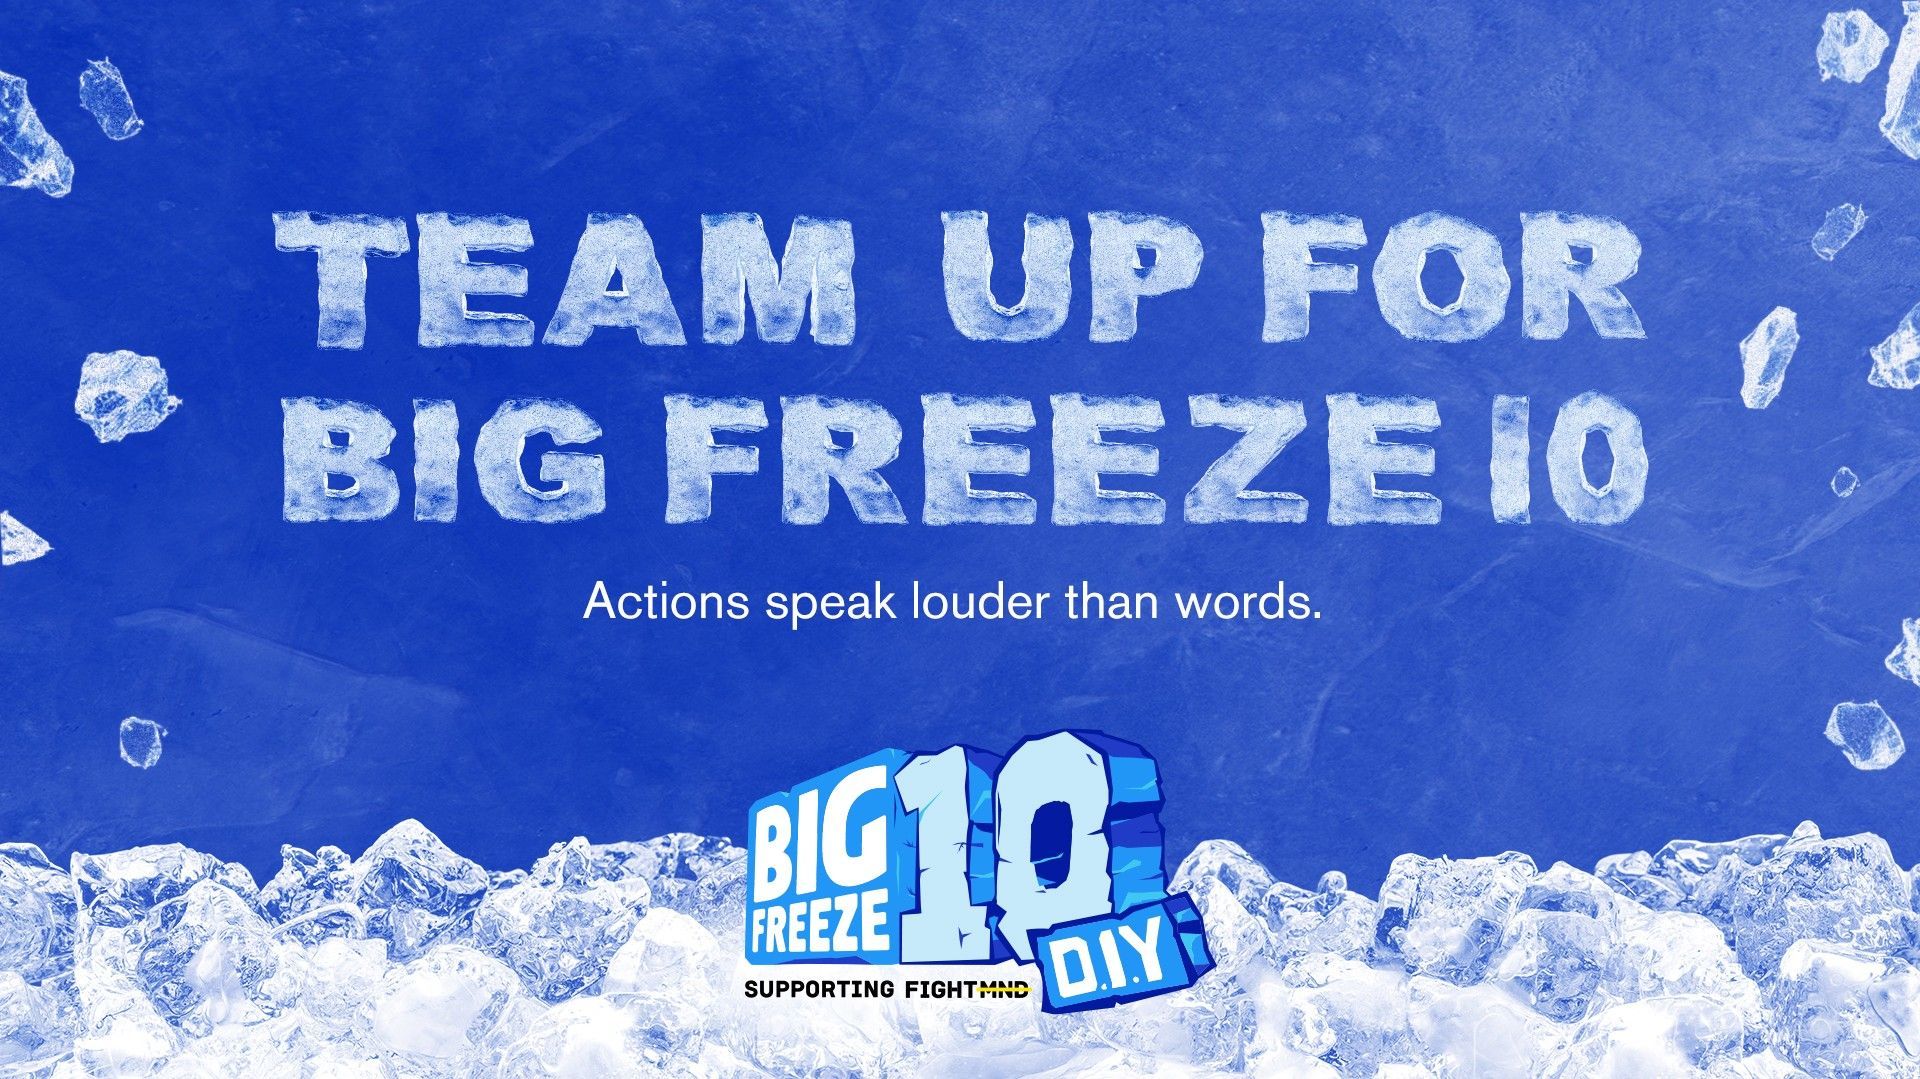 Nominate someone for the Big Freeze at BLC on Sunday June 16th! 100% of the proceeds to FightMND